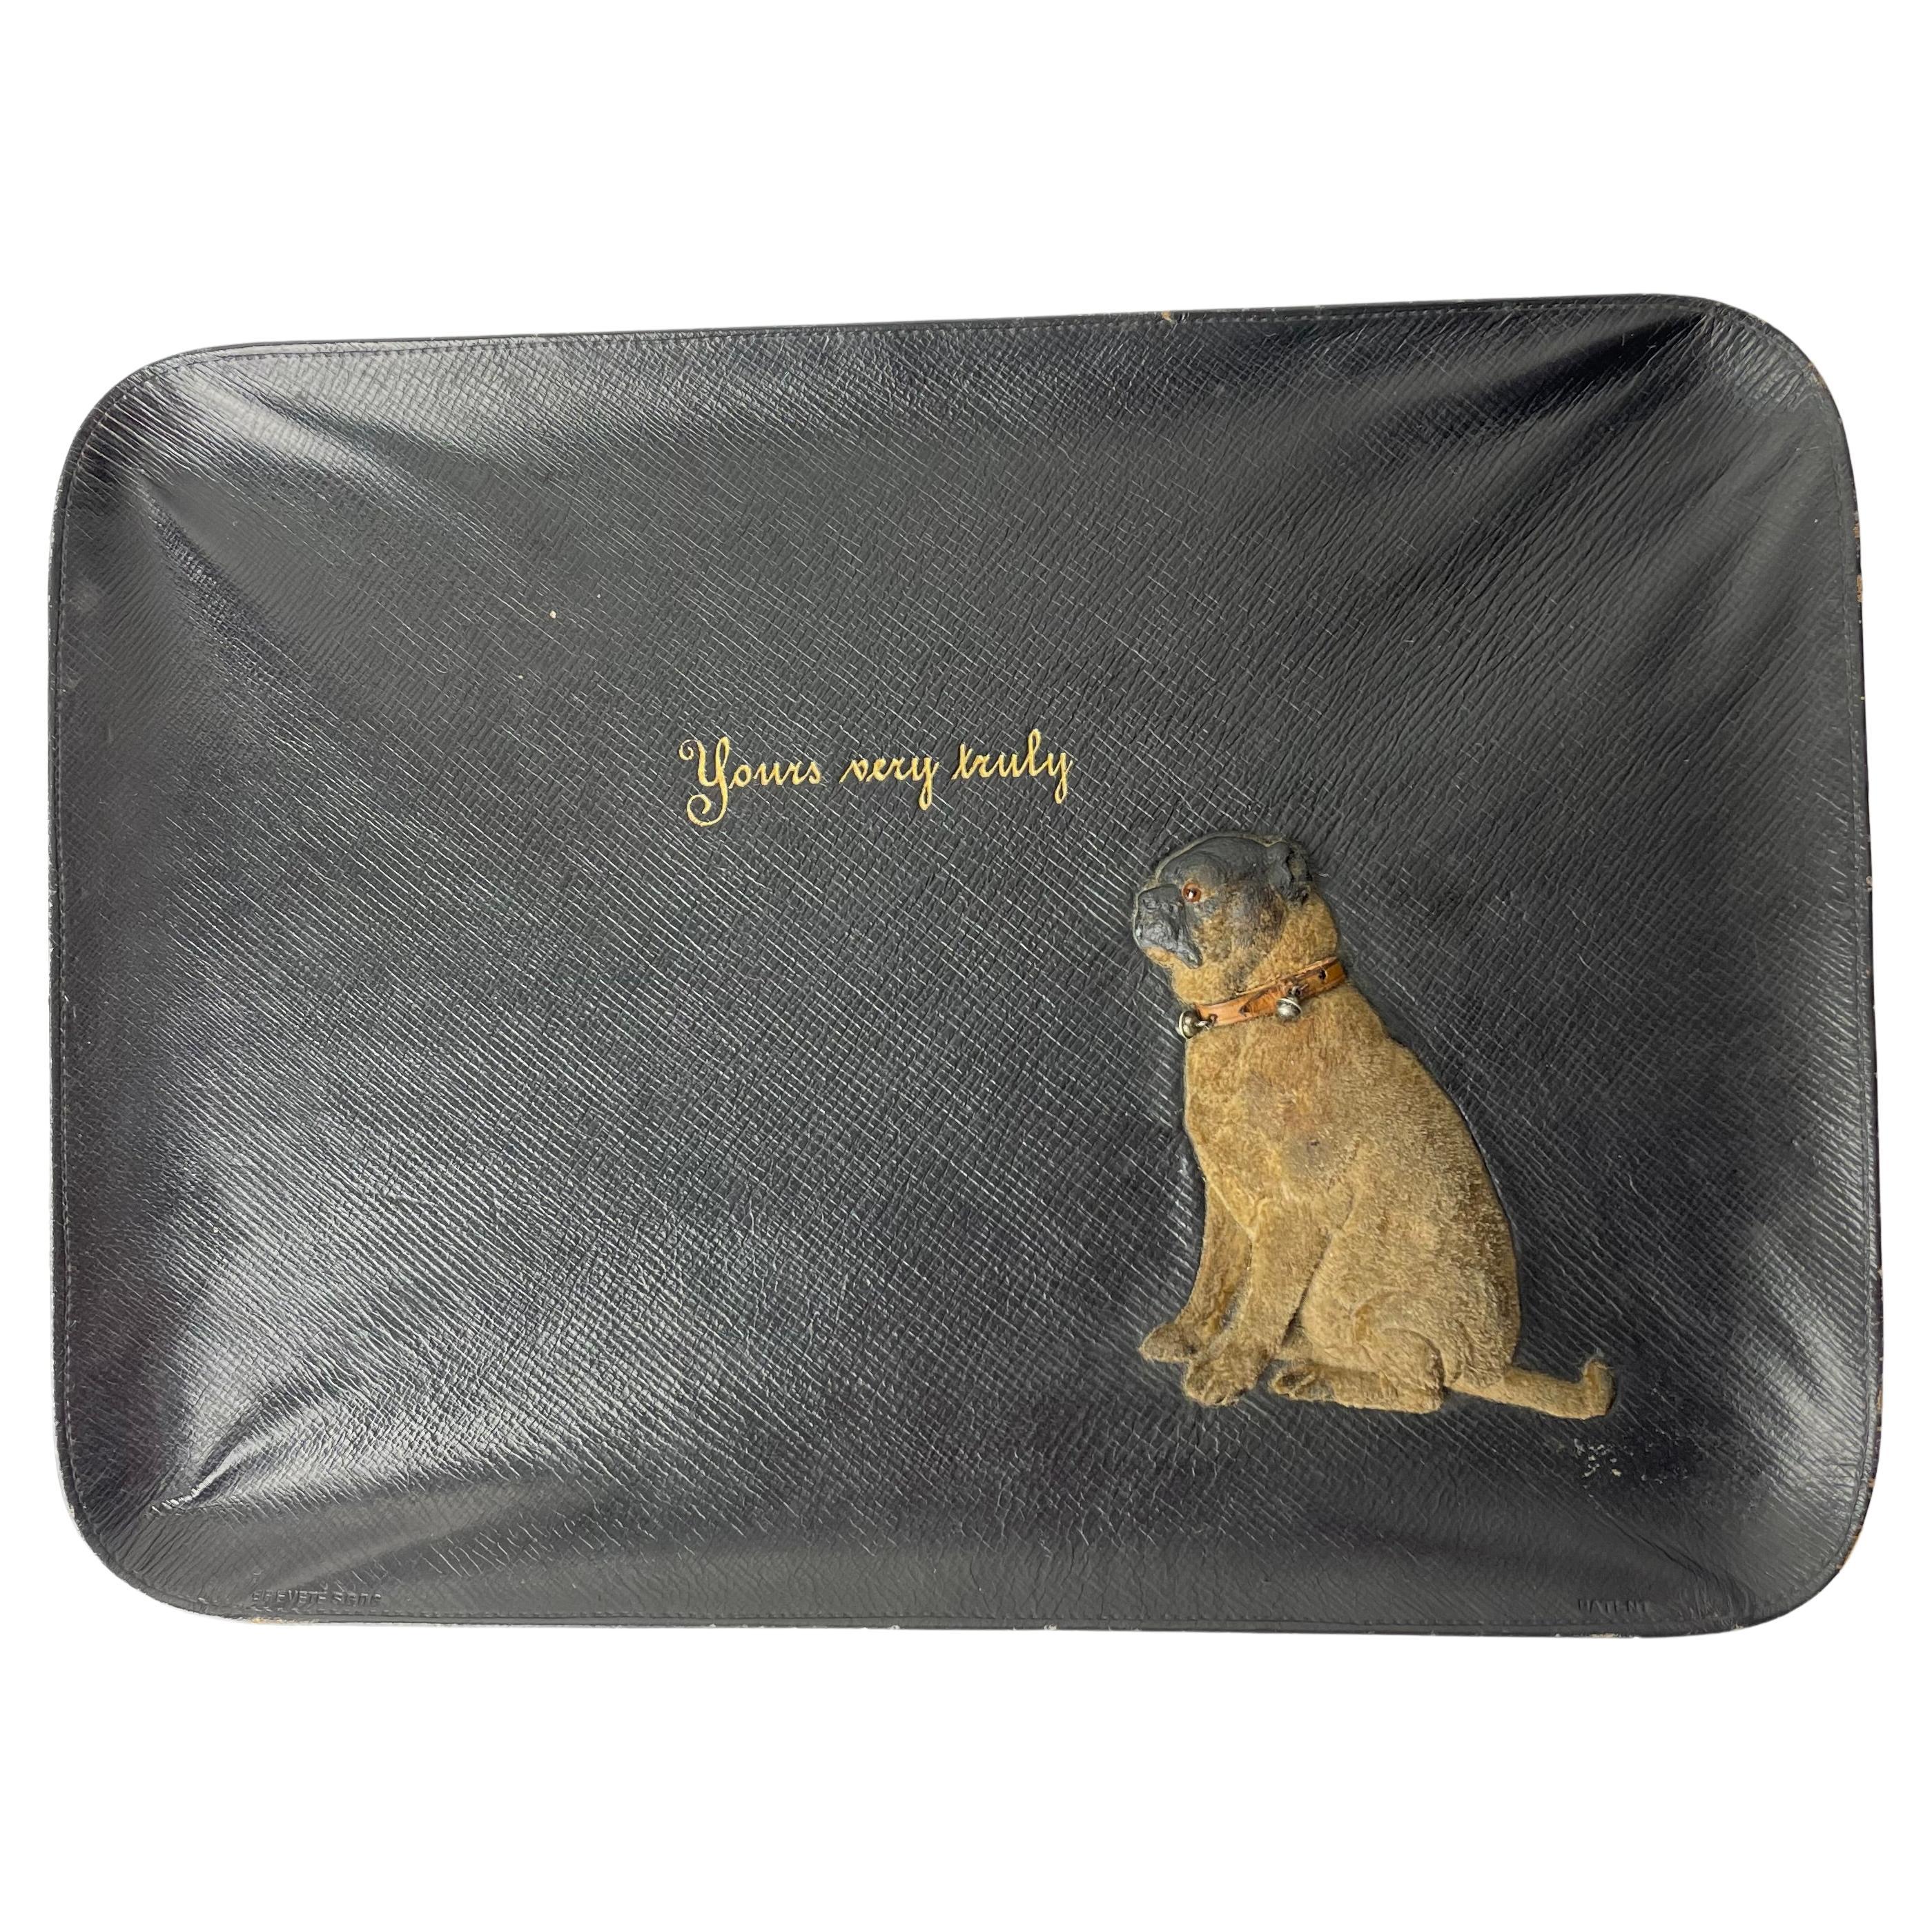 Leather-covered Desk dish with charming dog from the early 20th Century